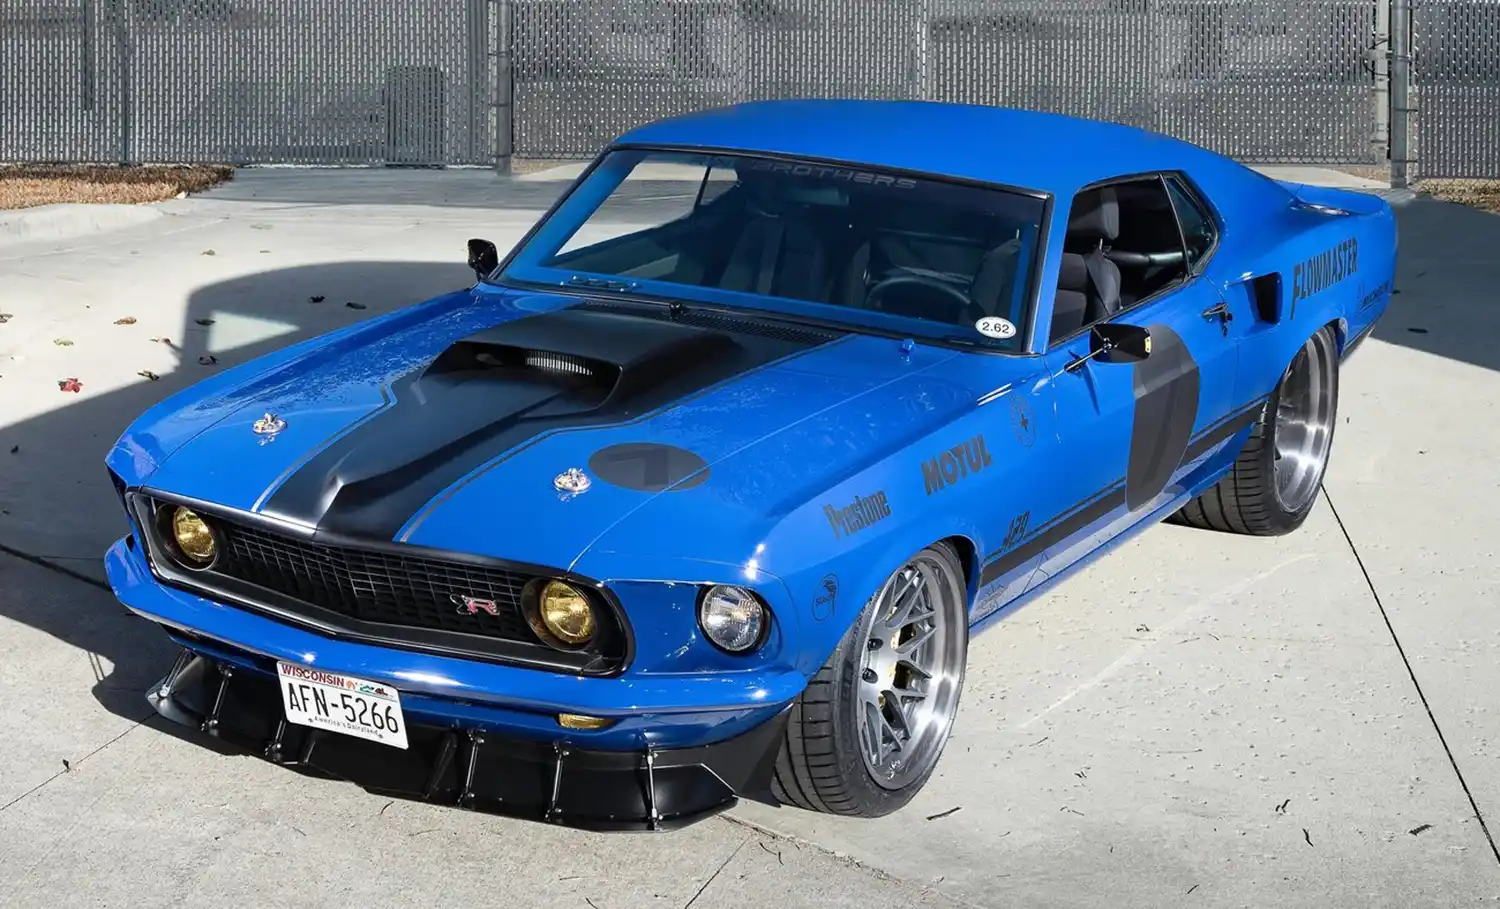 Ford Mustang Mach 1 UNKL by Ringbrothers (1969) | Wheelz.me-English